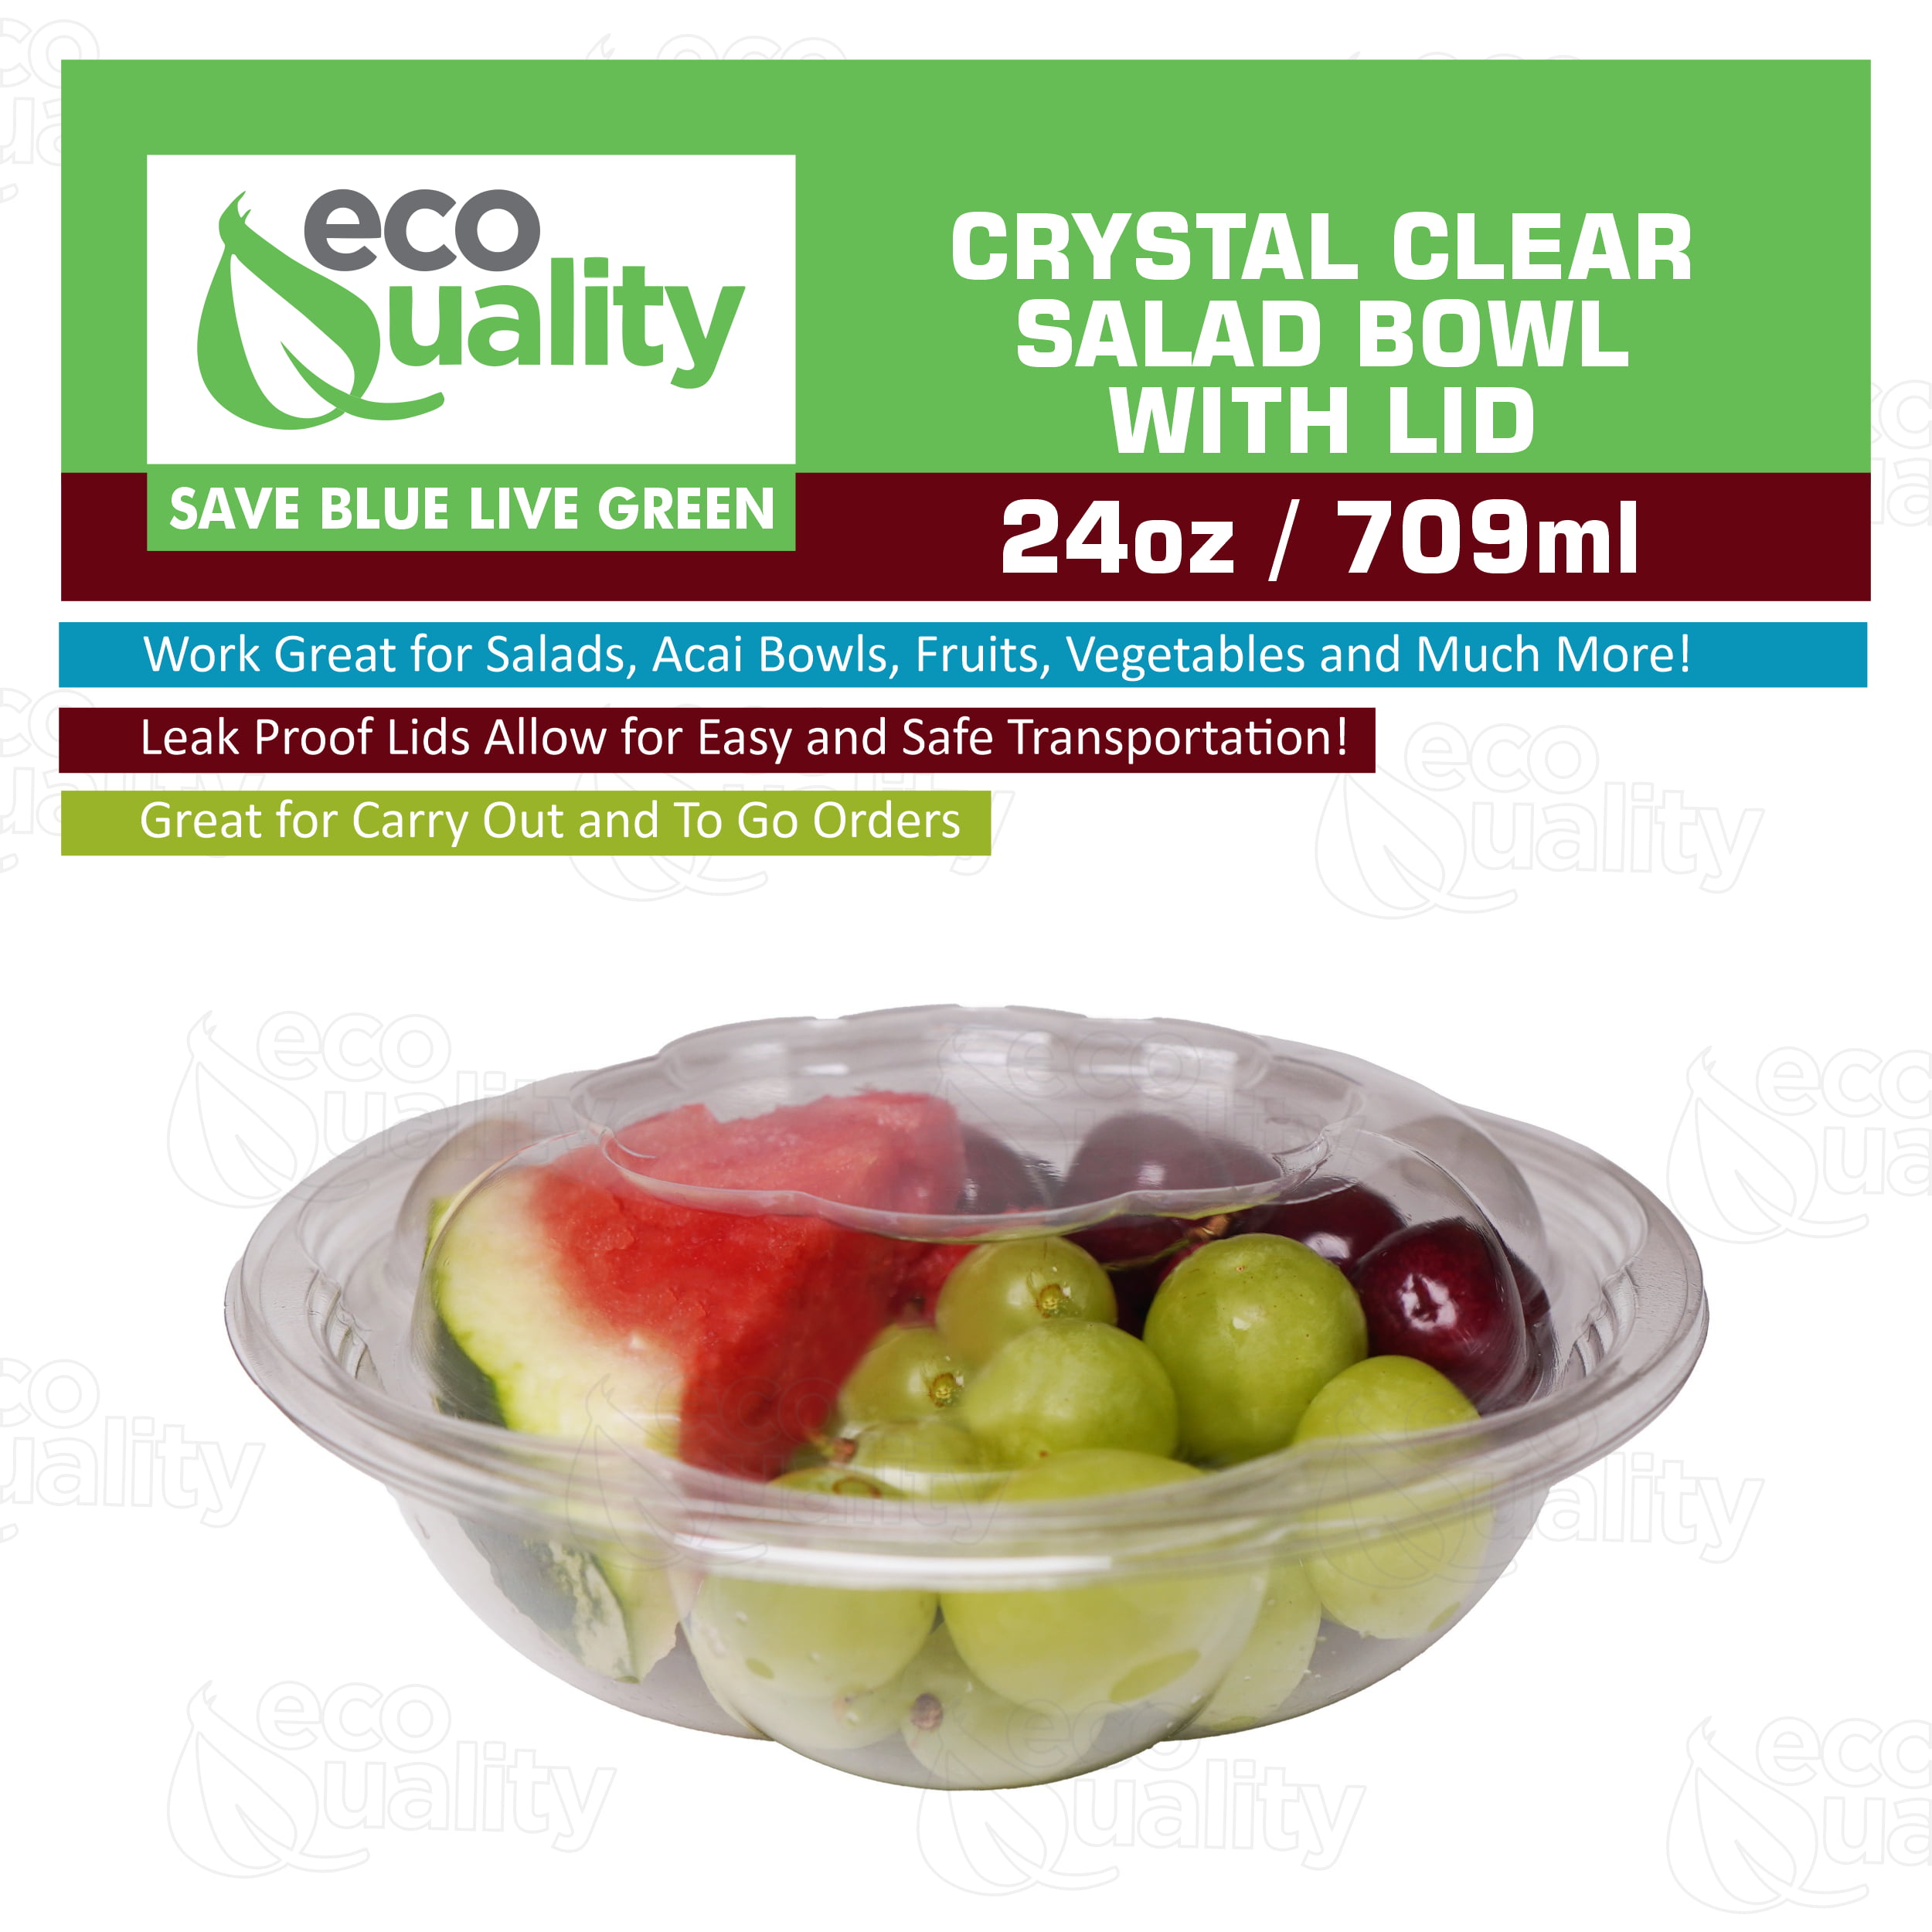 Stock Your Home 24oz Clear Plastic Salad Bowls with Lids Disposable (50 Pack) Small Takeout Container with Snap on Lid for Fruit Salads, Quinoa